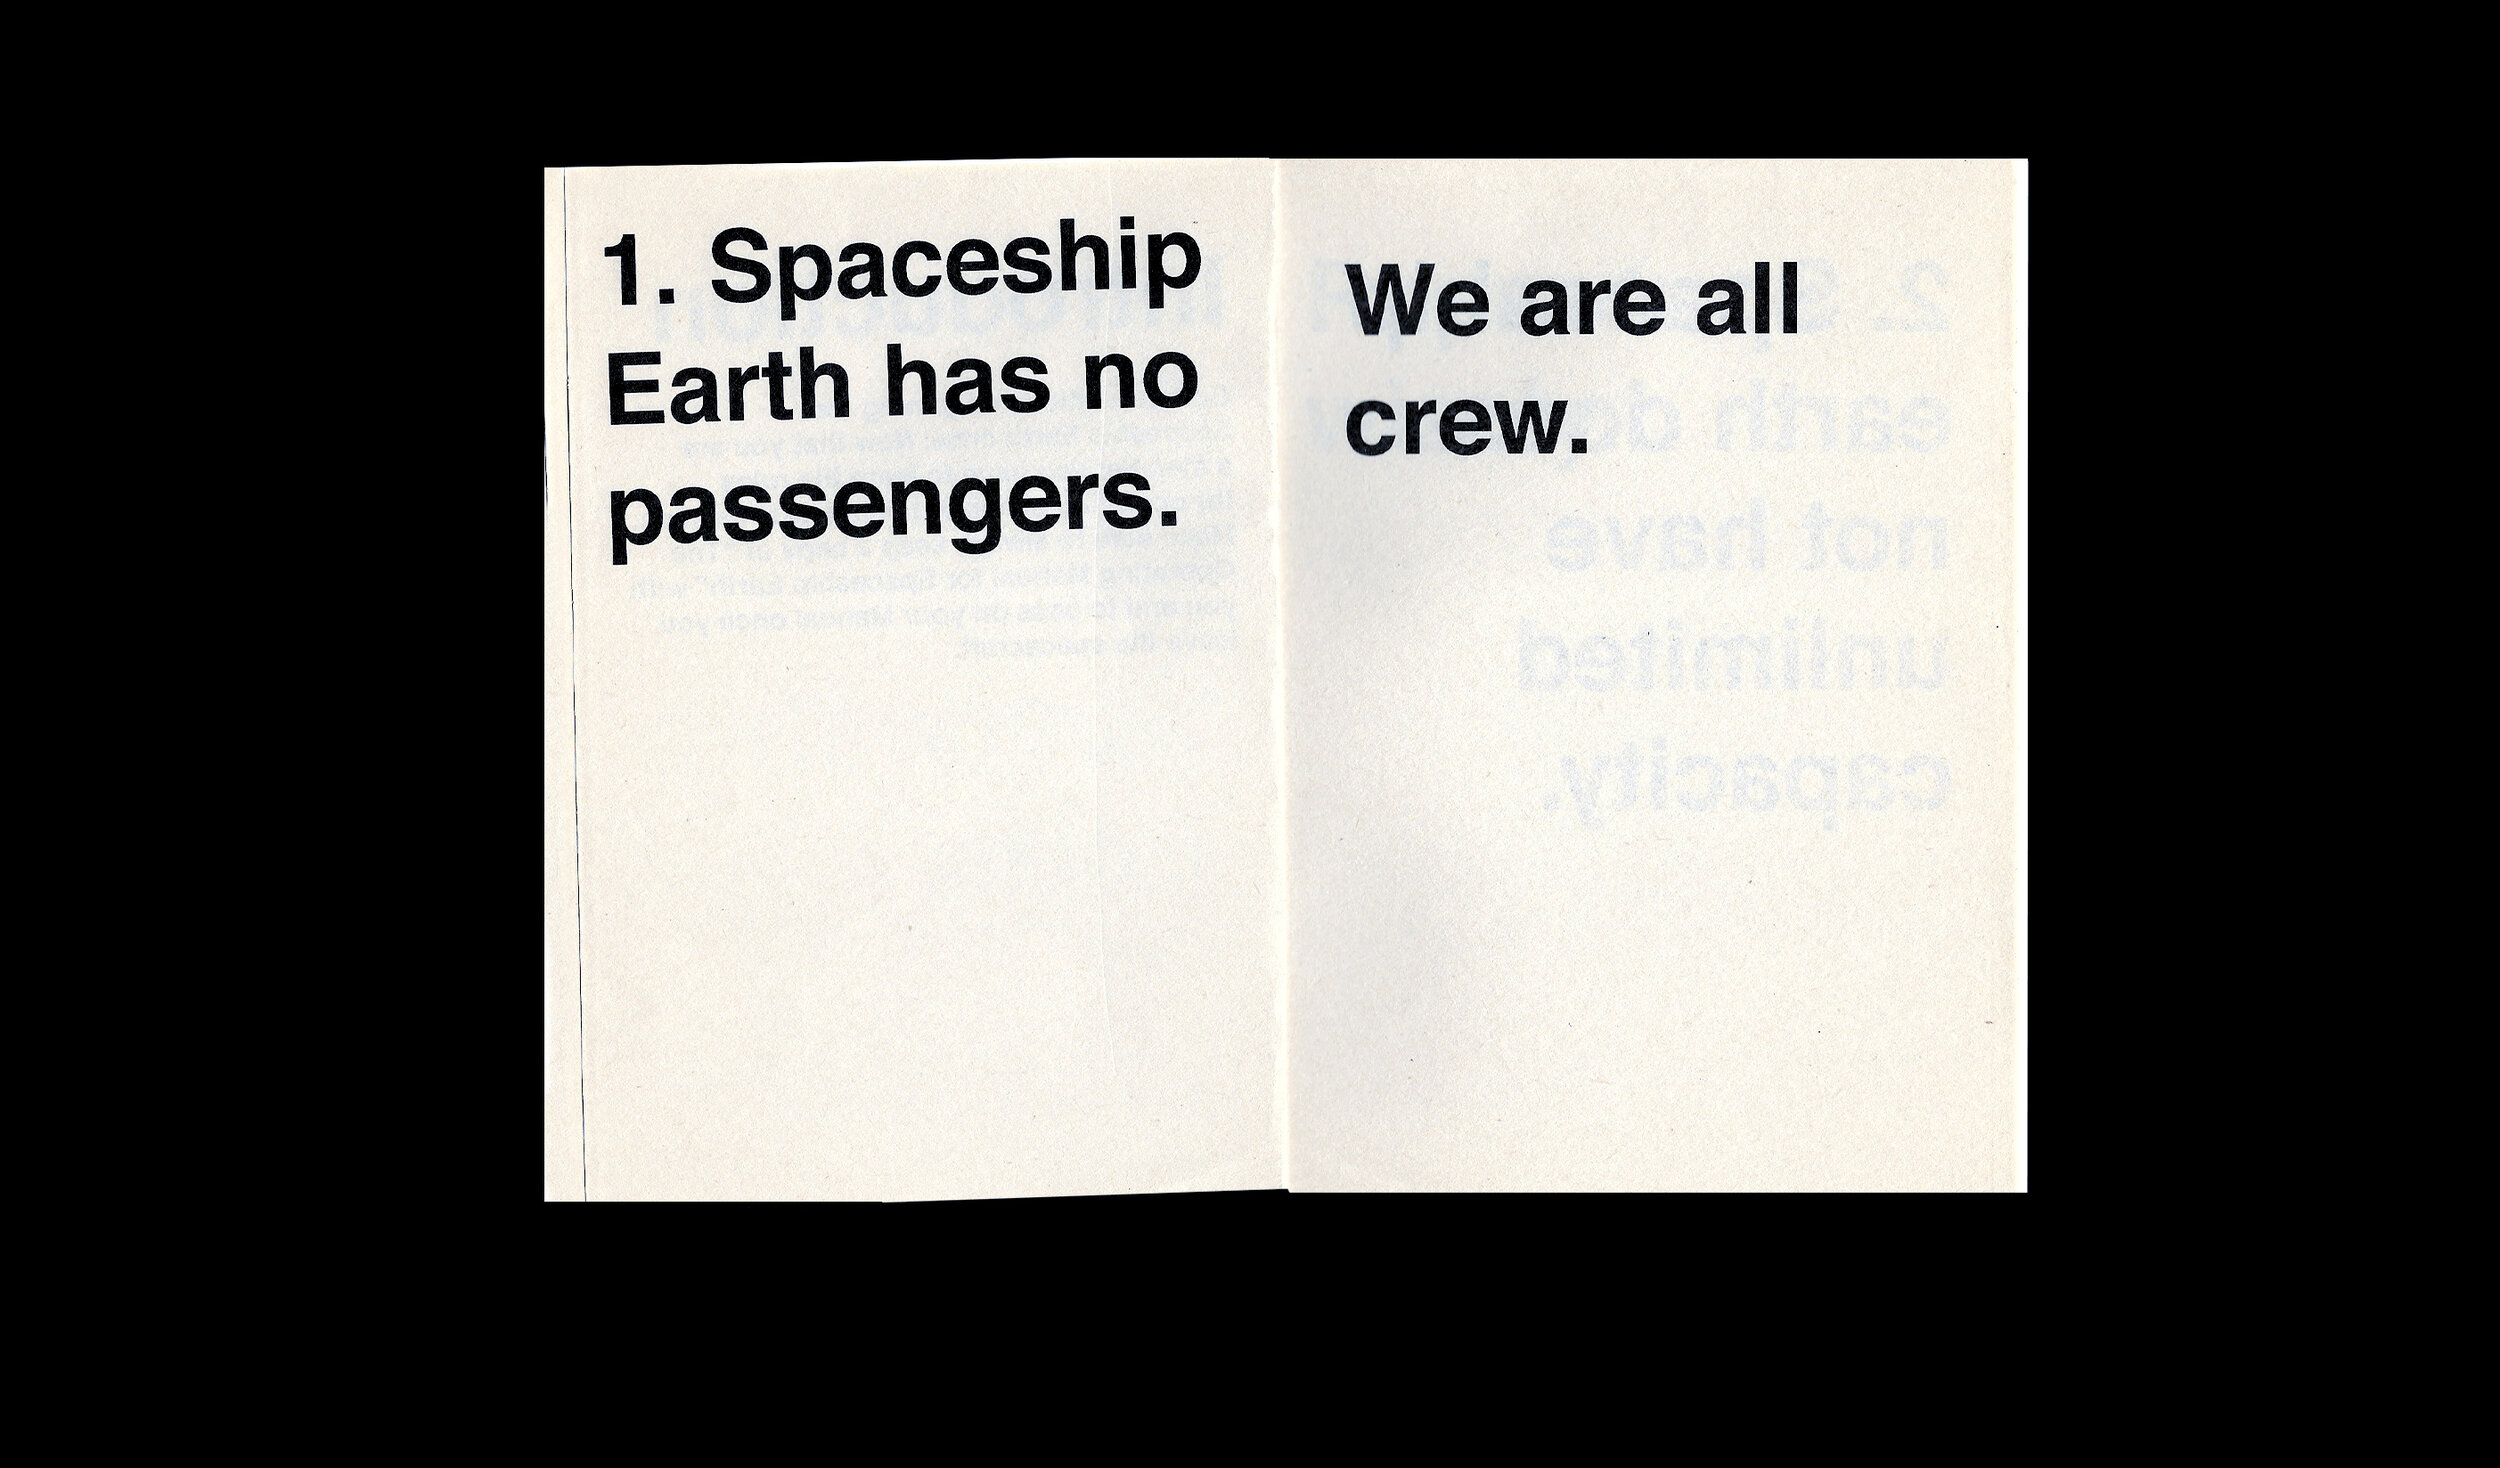 THE OPERATING MANUAL FOR SPACESHIP EARTH — FOTODEMIC